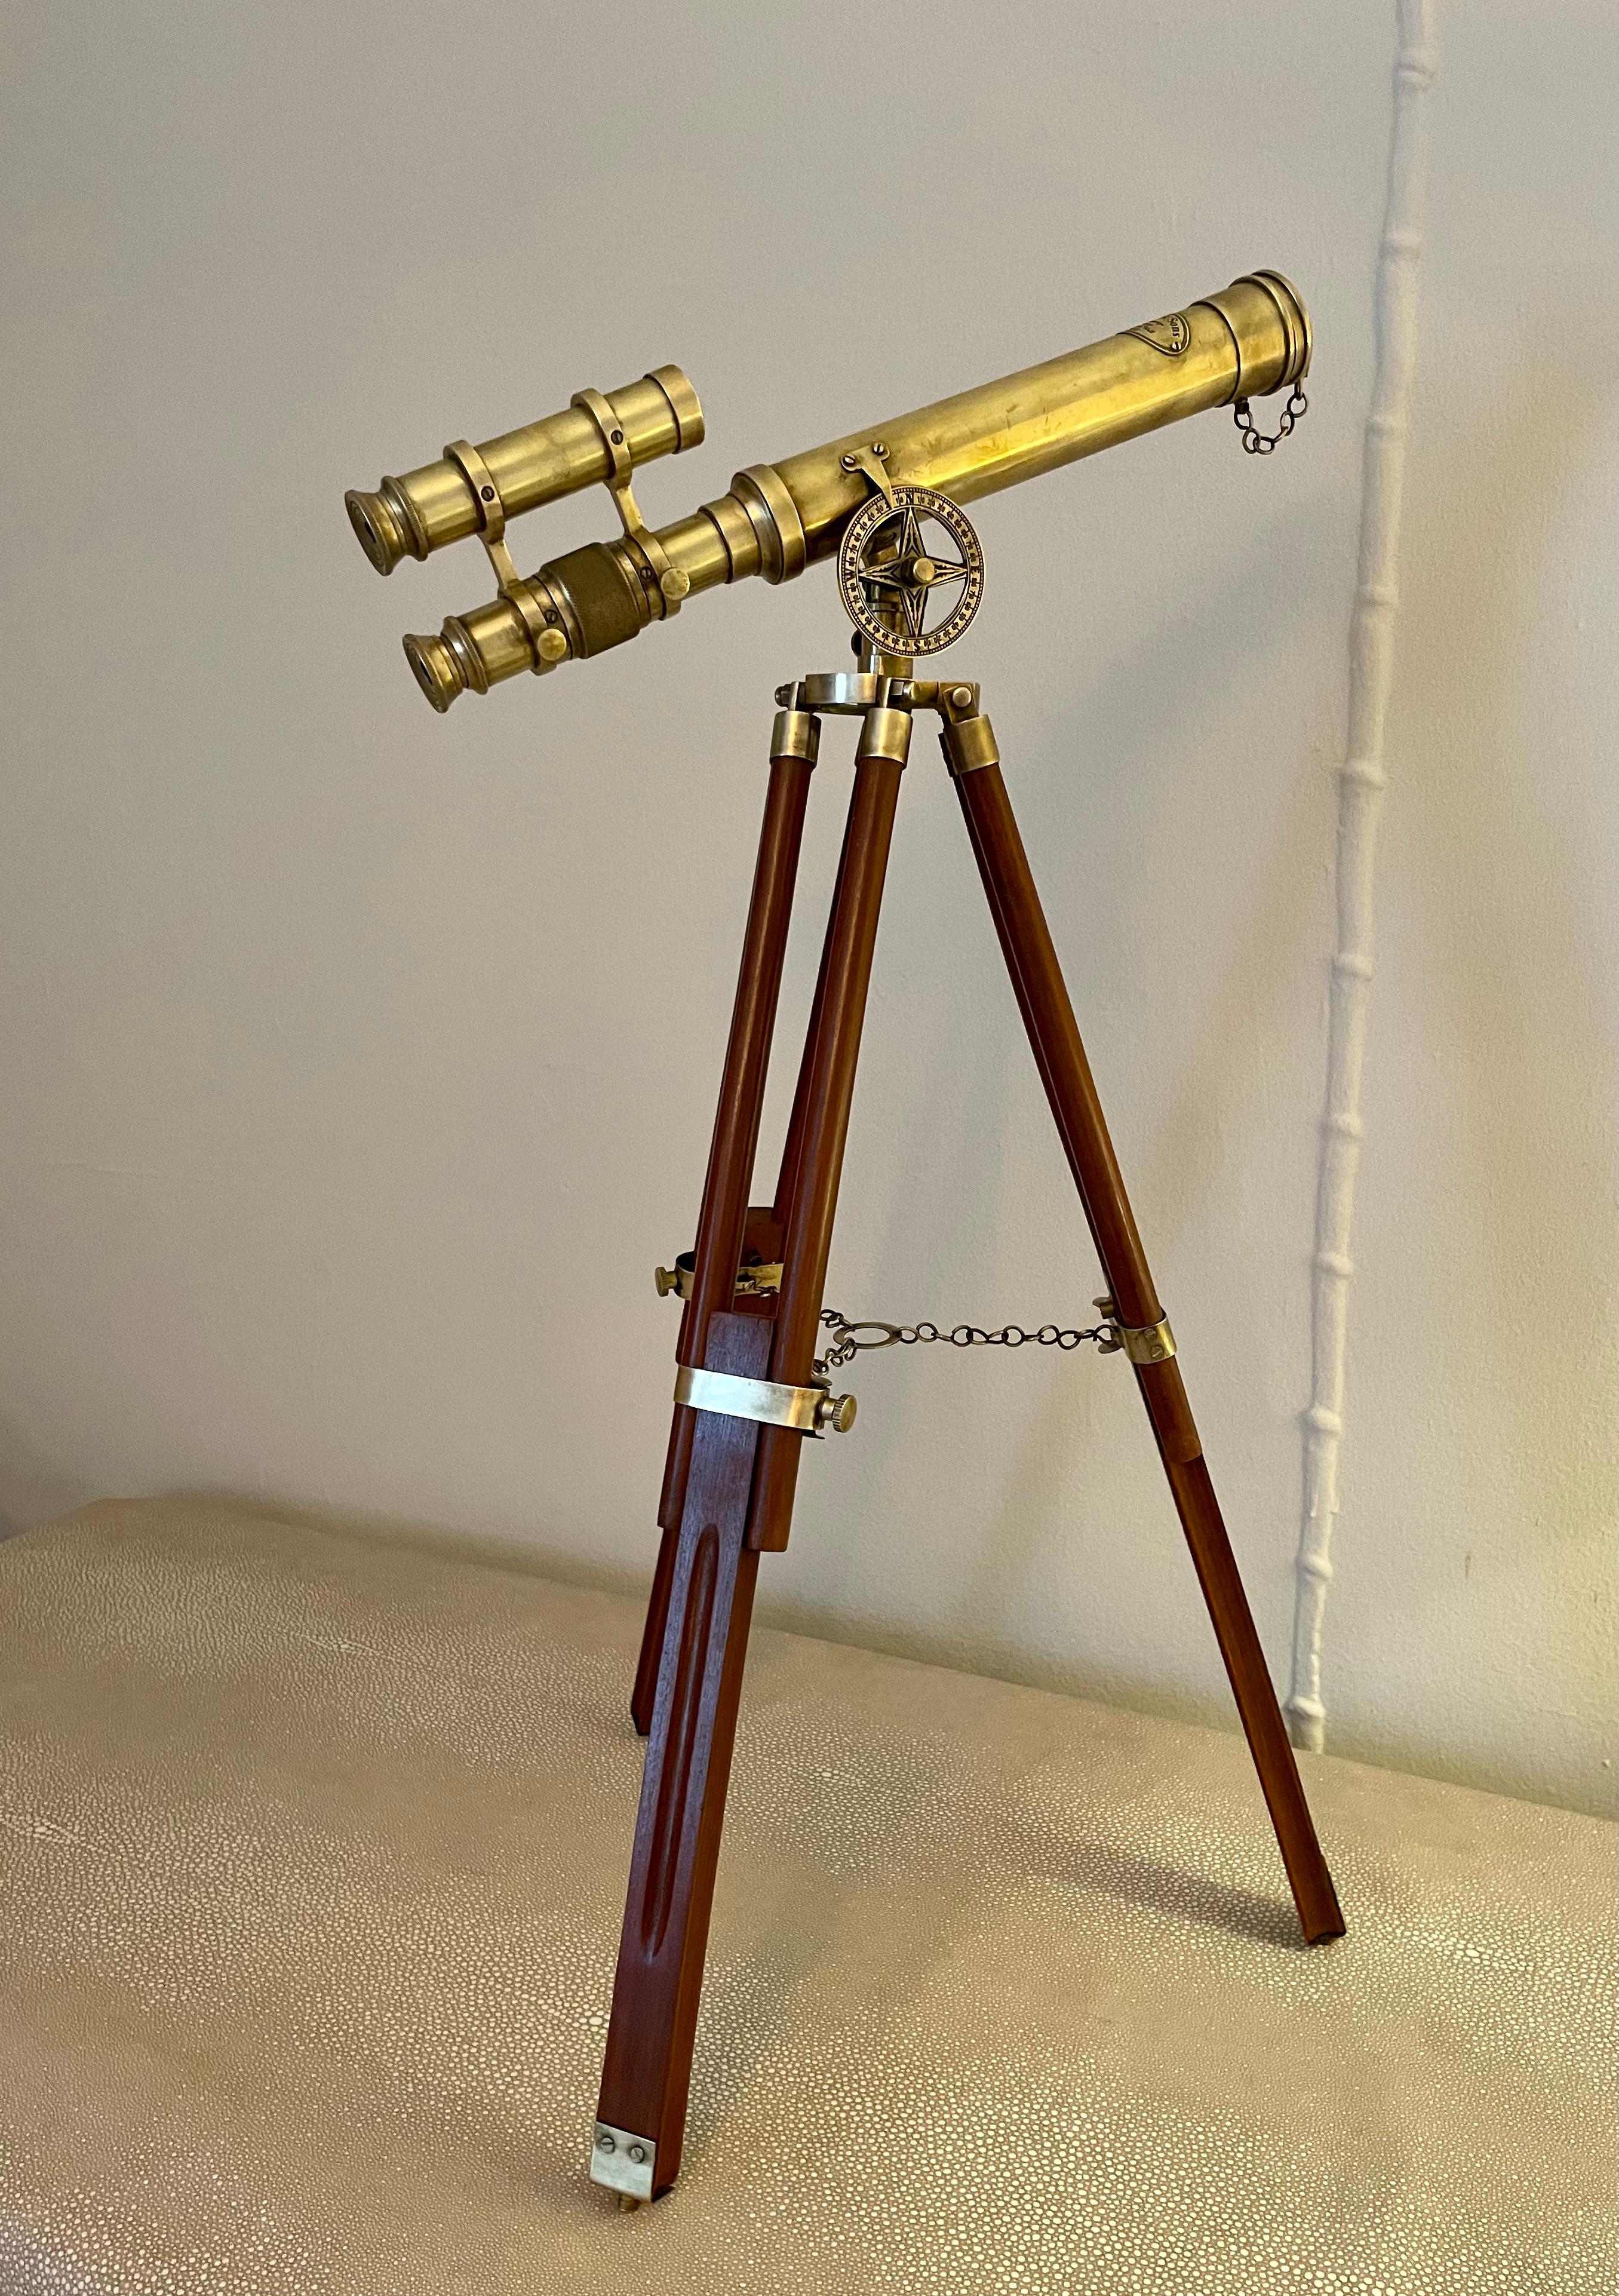 A wonderful decorative telescope, if great condition... in the style of Ralph Lauren.. Full working condition! Eyepiece can be detached to a make a pair of binoculars. 


Measurements: 

Full height 28